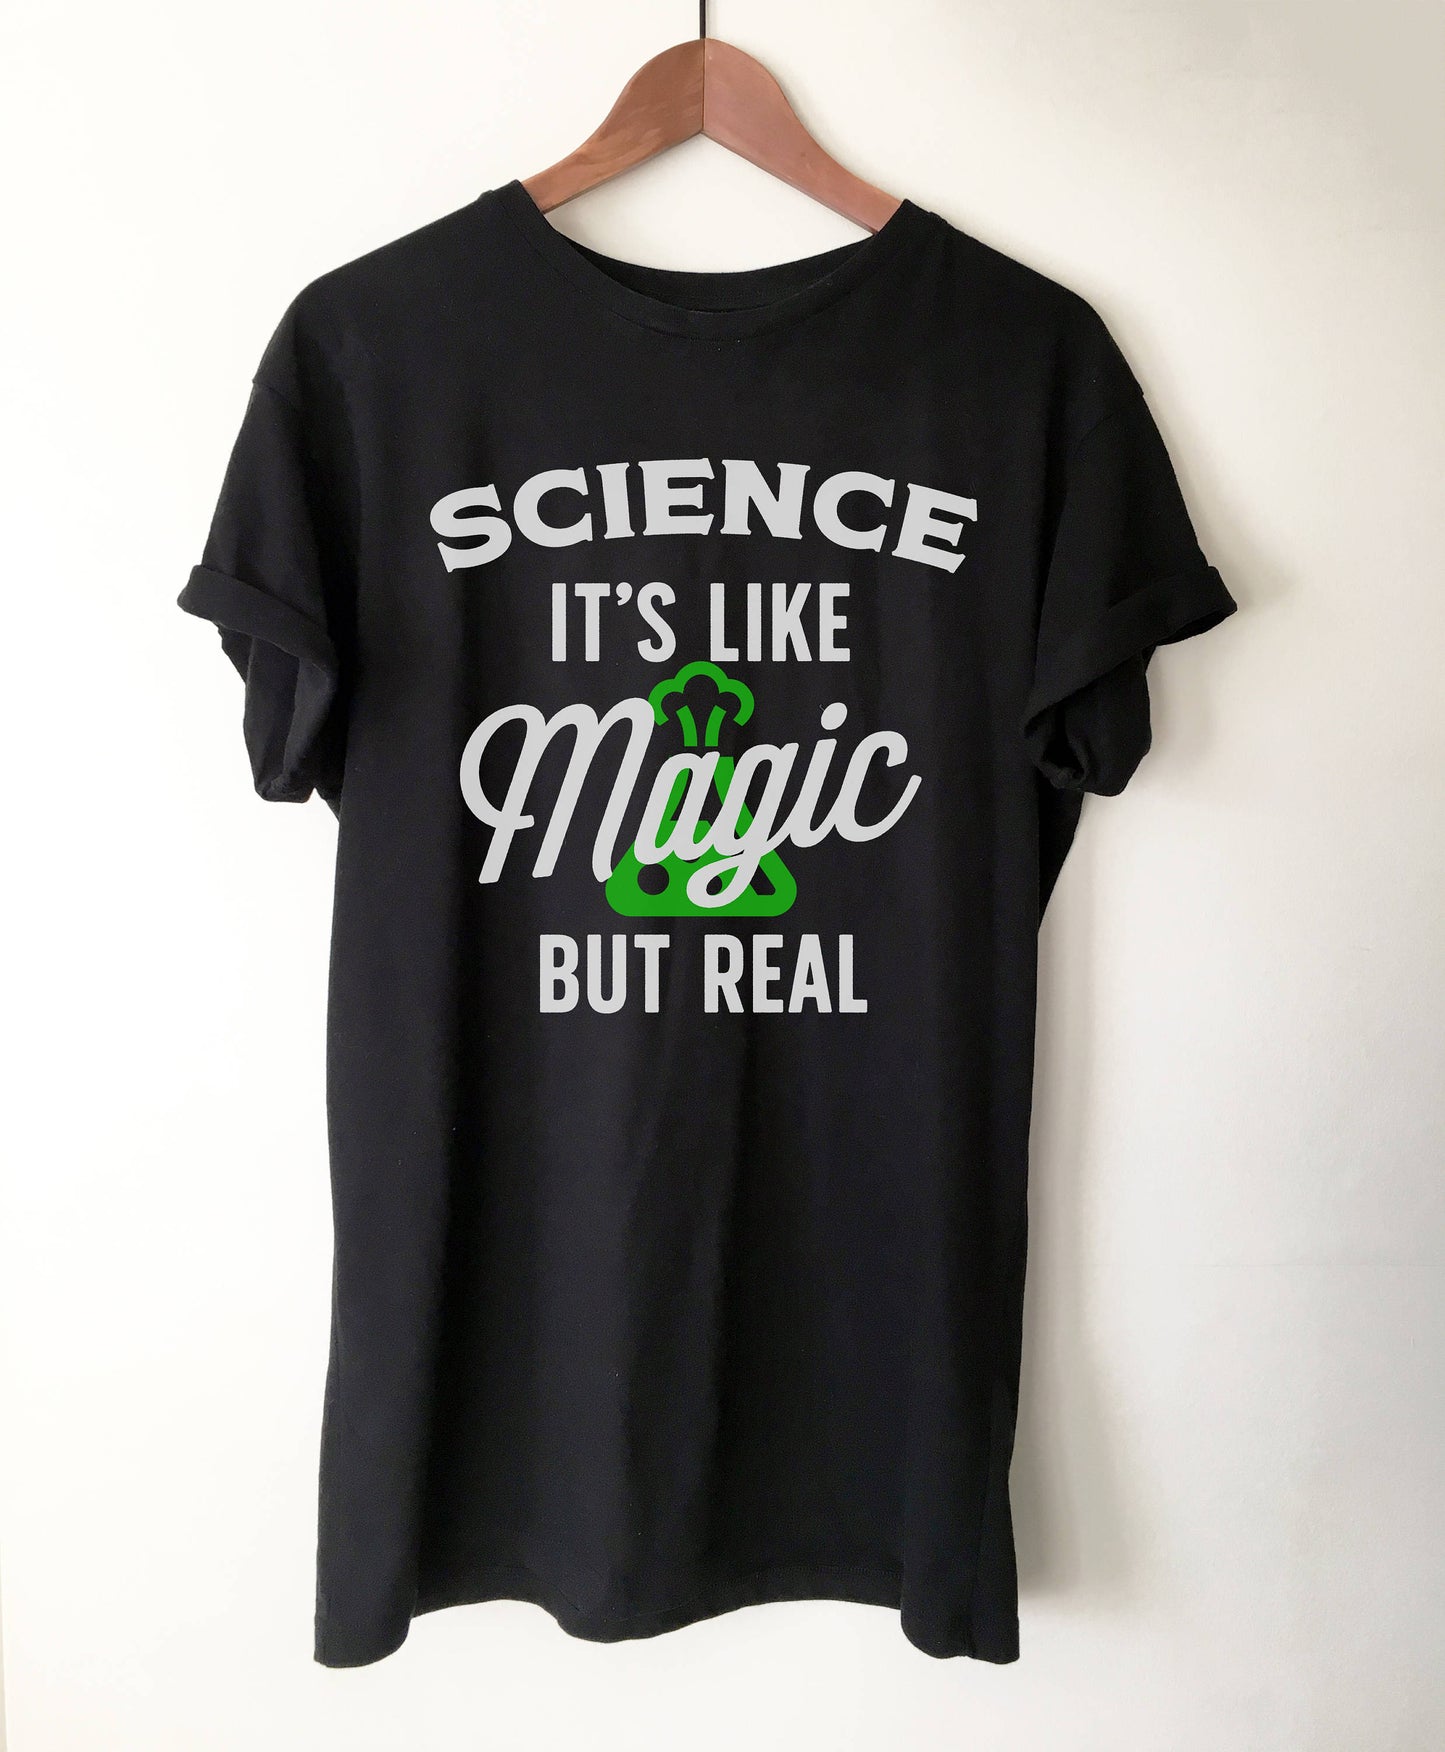 Science It's Like Magic But Real Unisex Shirt - Science shirt, Earth day shirt, Scientist shirt, Funny science shirt, Science teacher gift